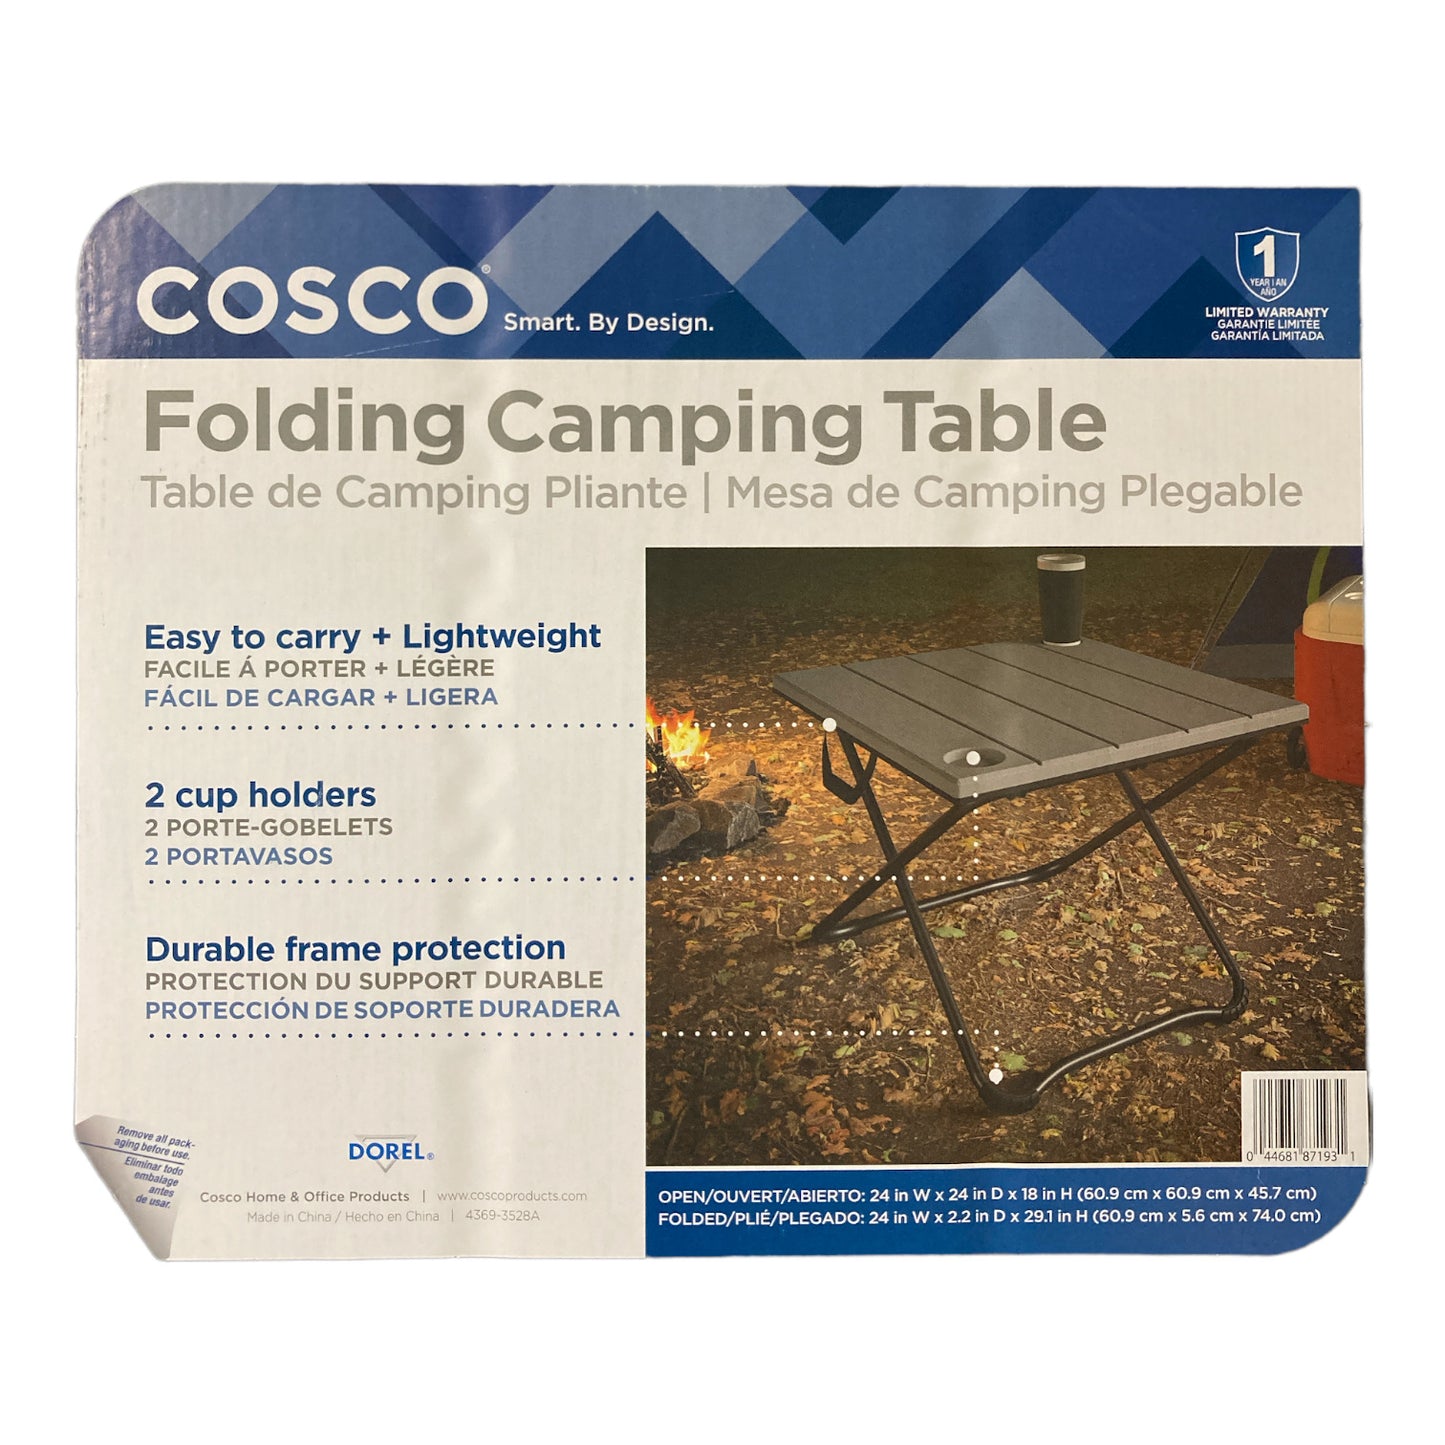 Cosco 24" Folding Camping Table Steel Frame Resin Tabletop, Grey